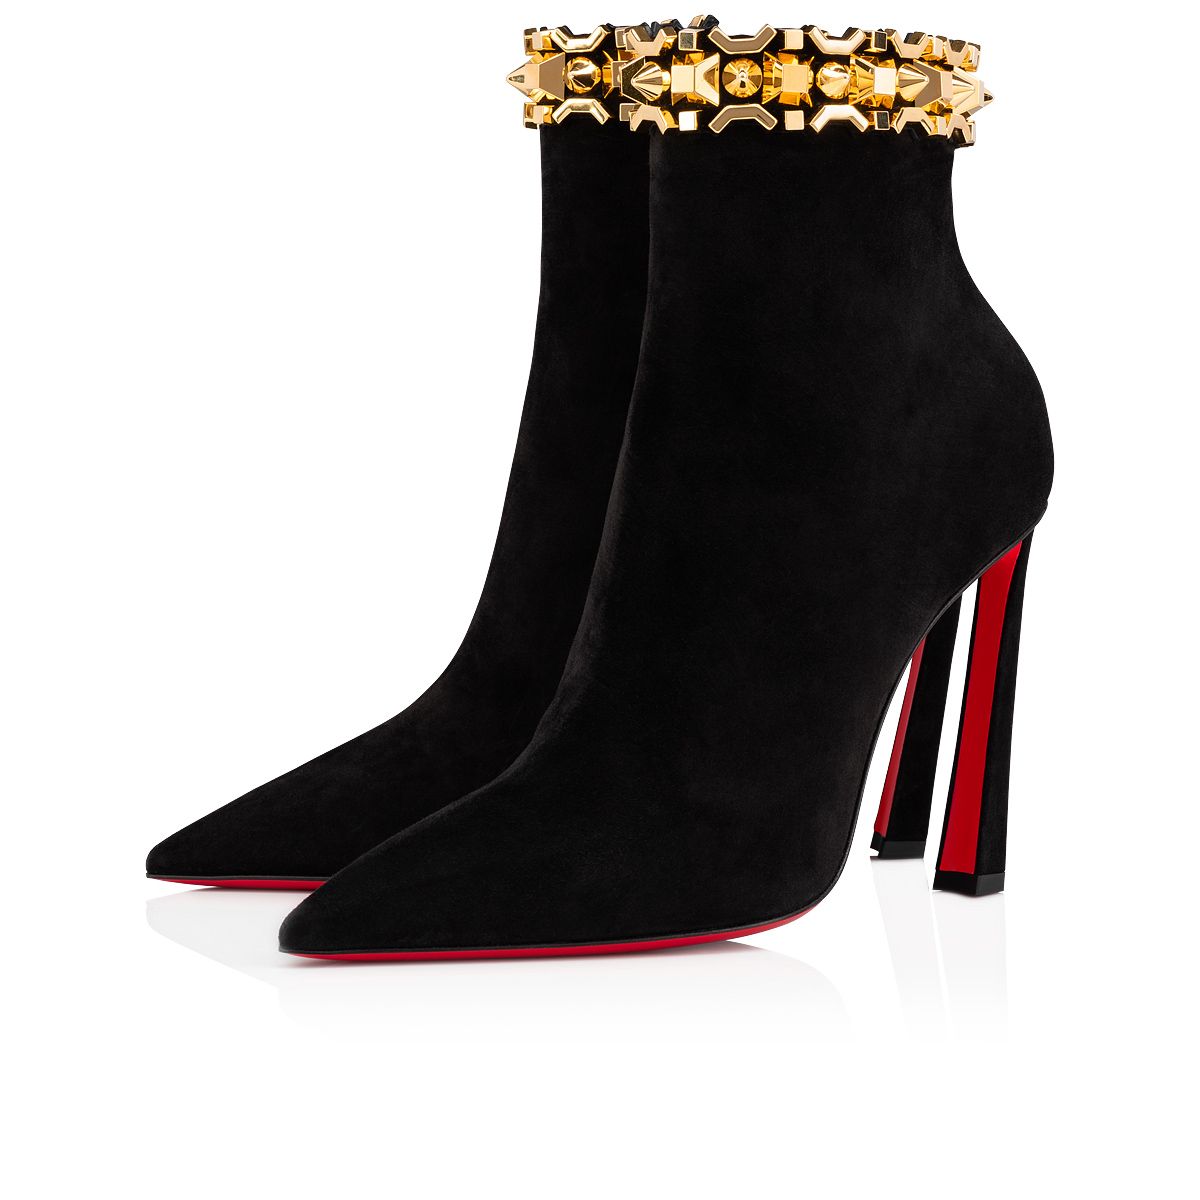 Christian Louboutin Asteroispikes Booty 100 mm – Shoes Post